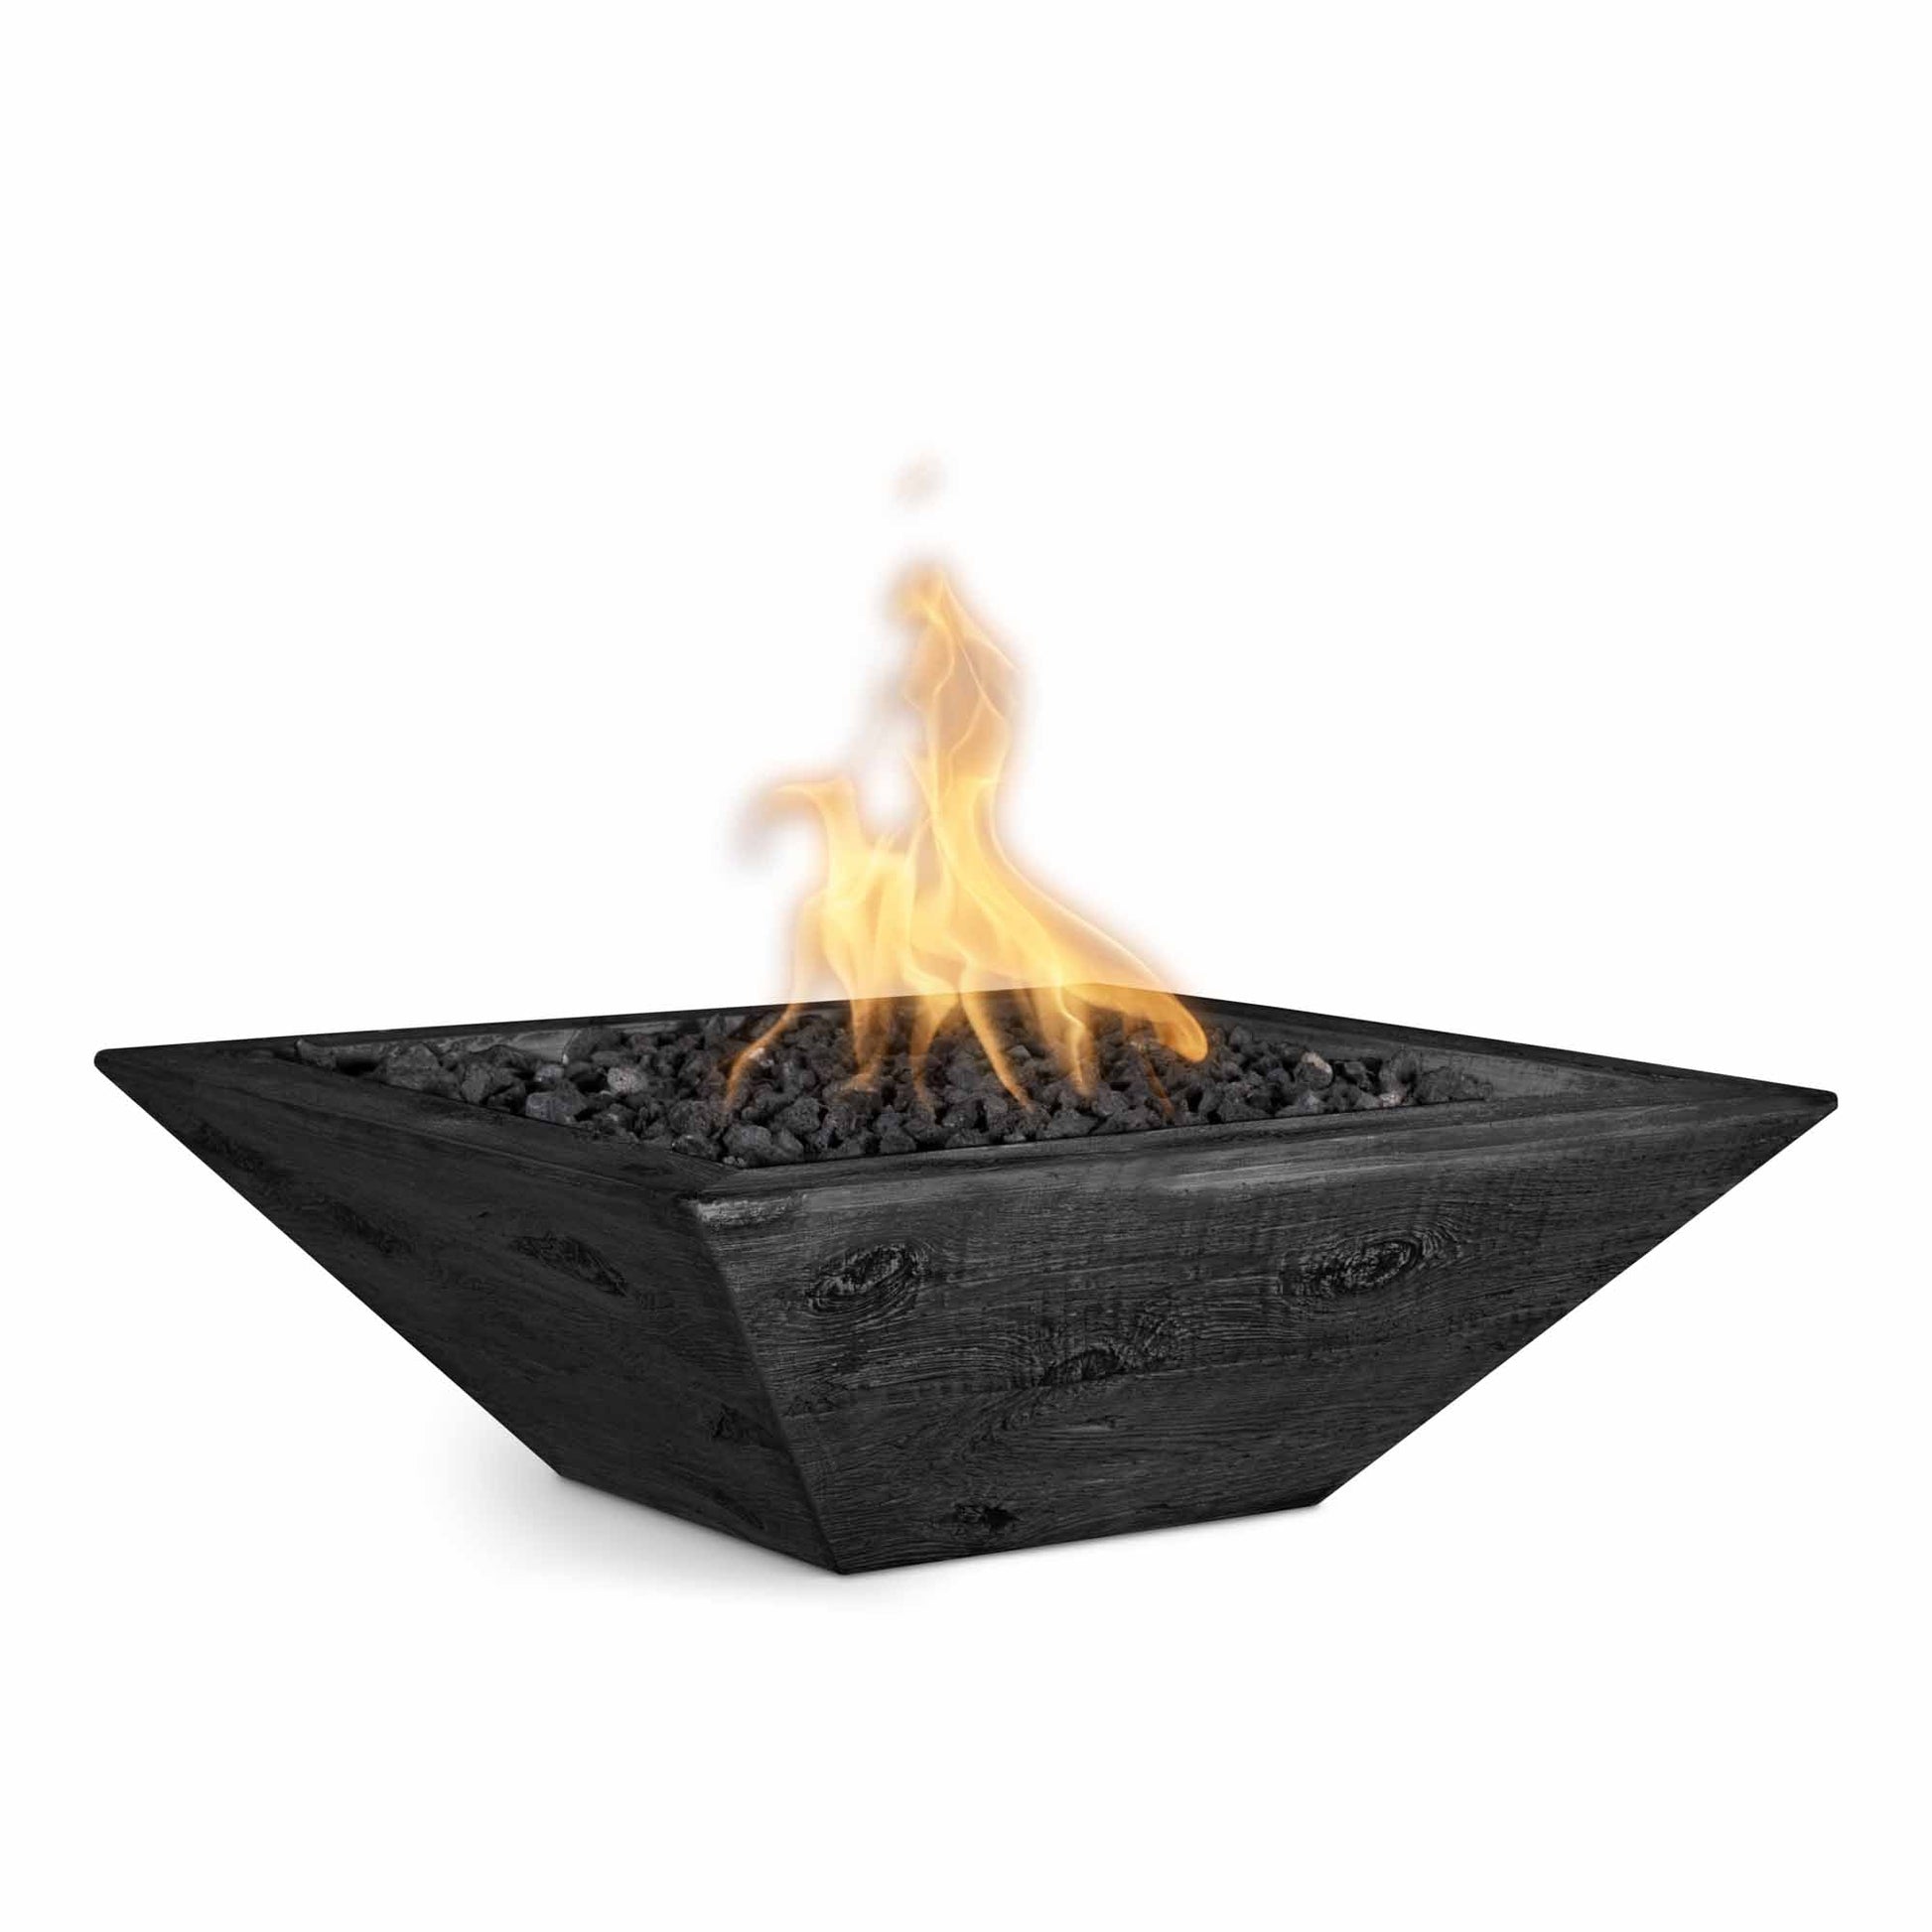 The Outdoor Plus Square Maya 30" Ebony Wood Grain Natural Gas Fire Bowl with Match Lit with Flame Sense Ignition